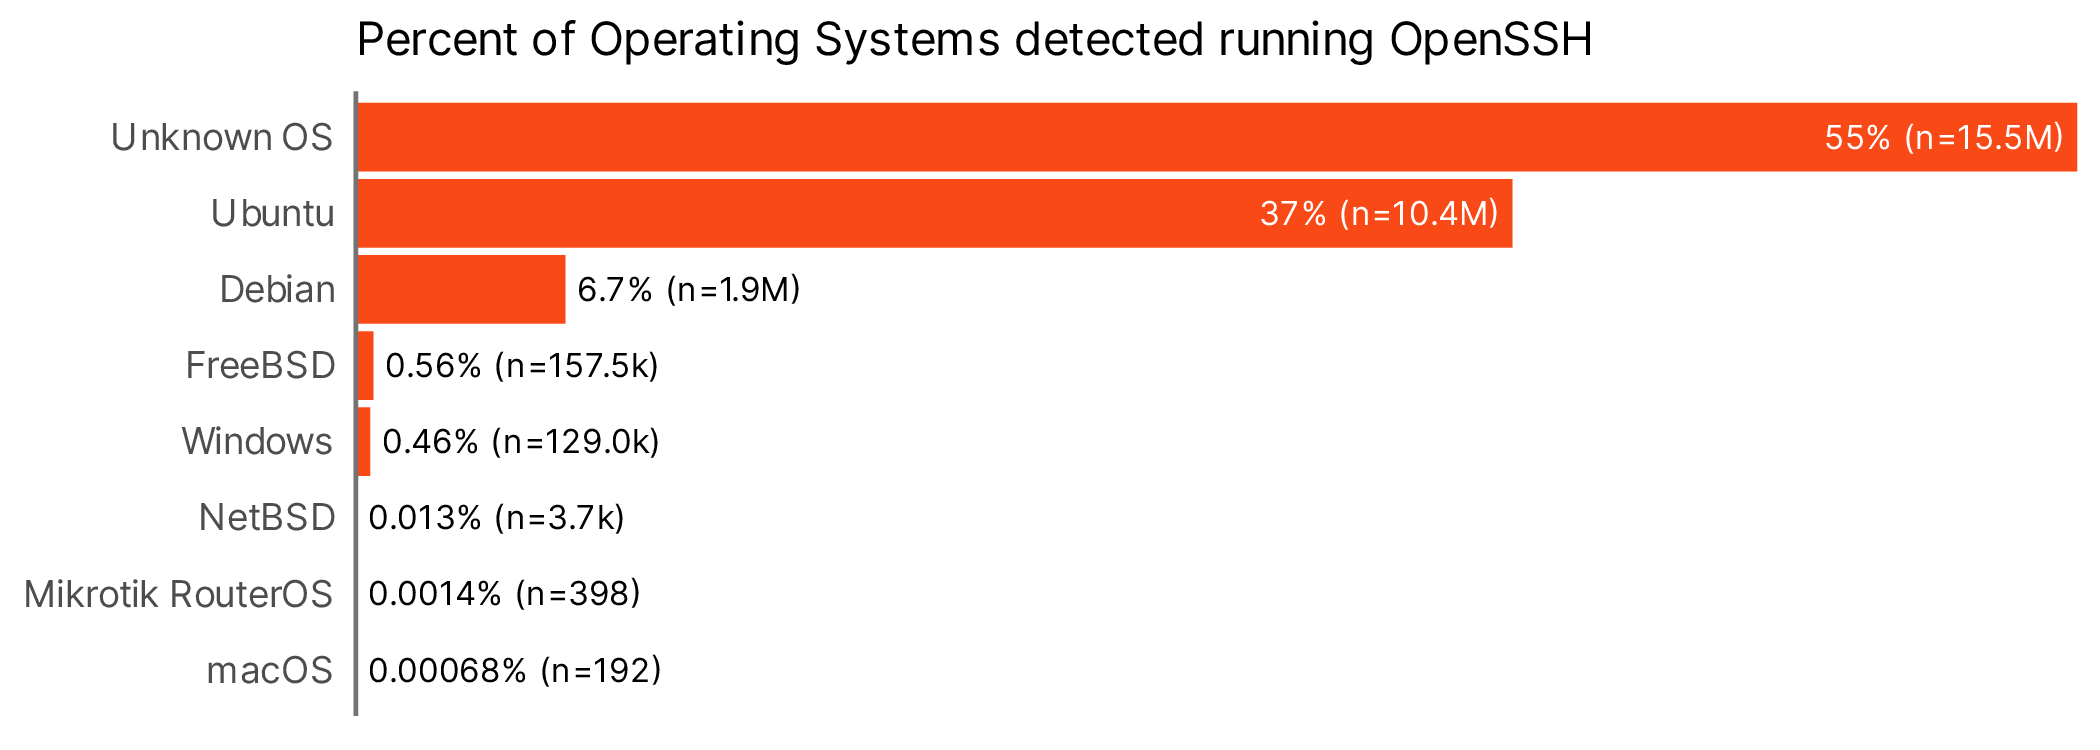 Bar chart showing the breakdown of OpenSSH operating systems